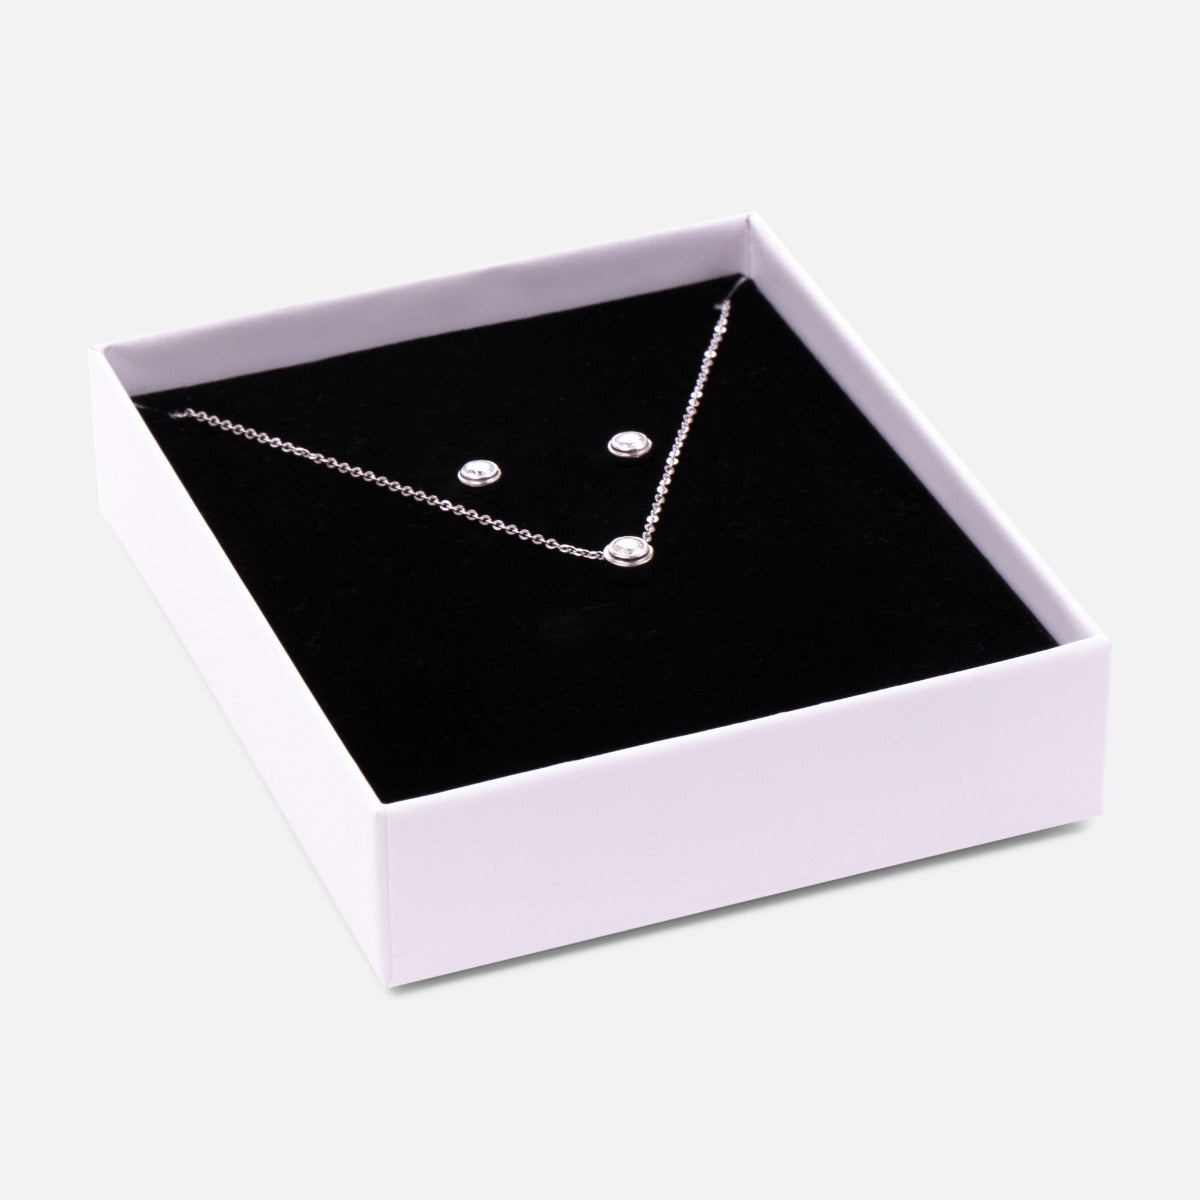 Box with sterling silver pendant and earrings